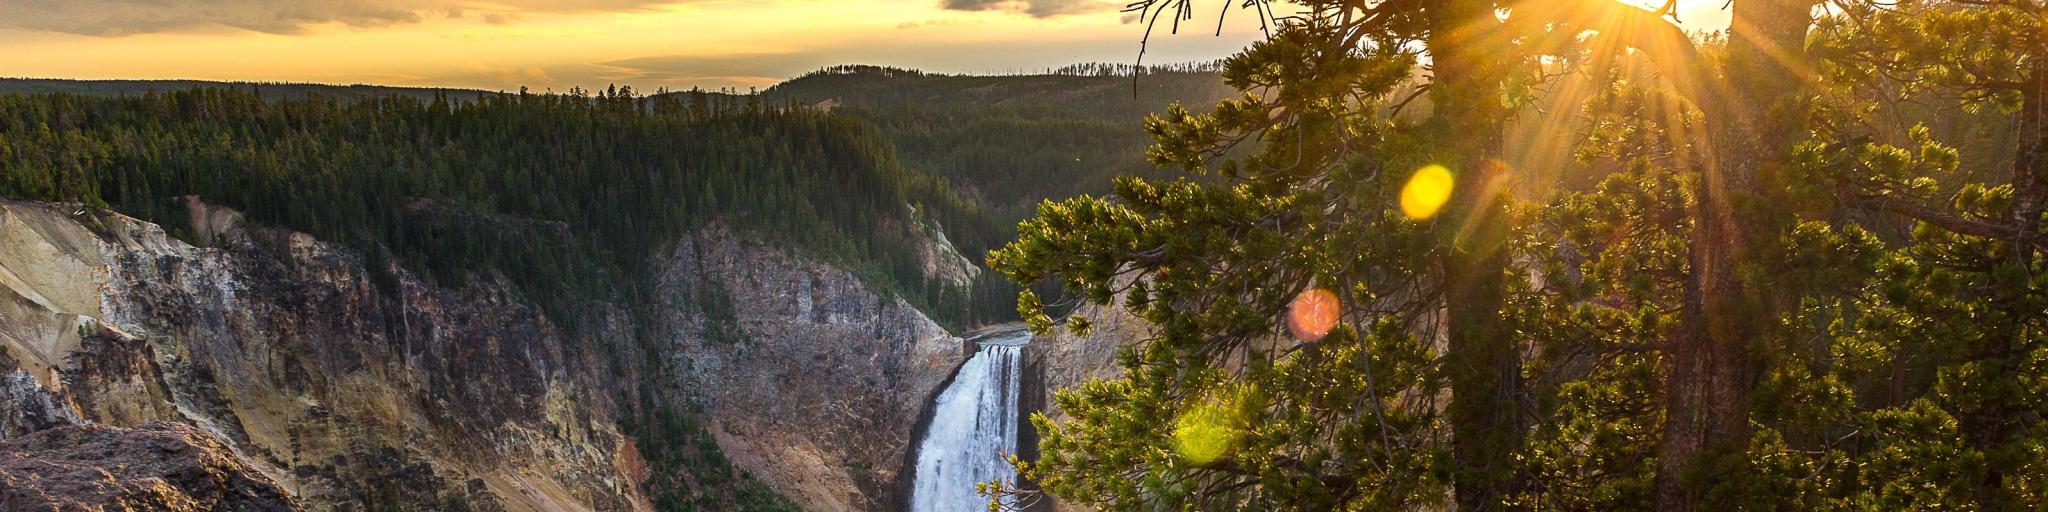 Grand Canyon of Yellowstone National Park, USA taken at sunset with rocky cliffs and the canyon below with a waterfall and trees in the distance. 